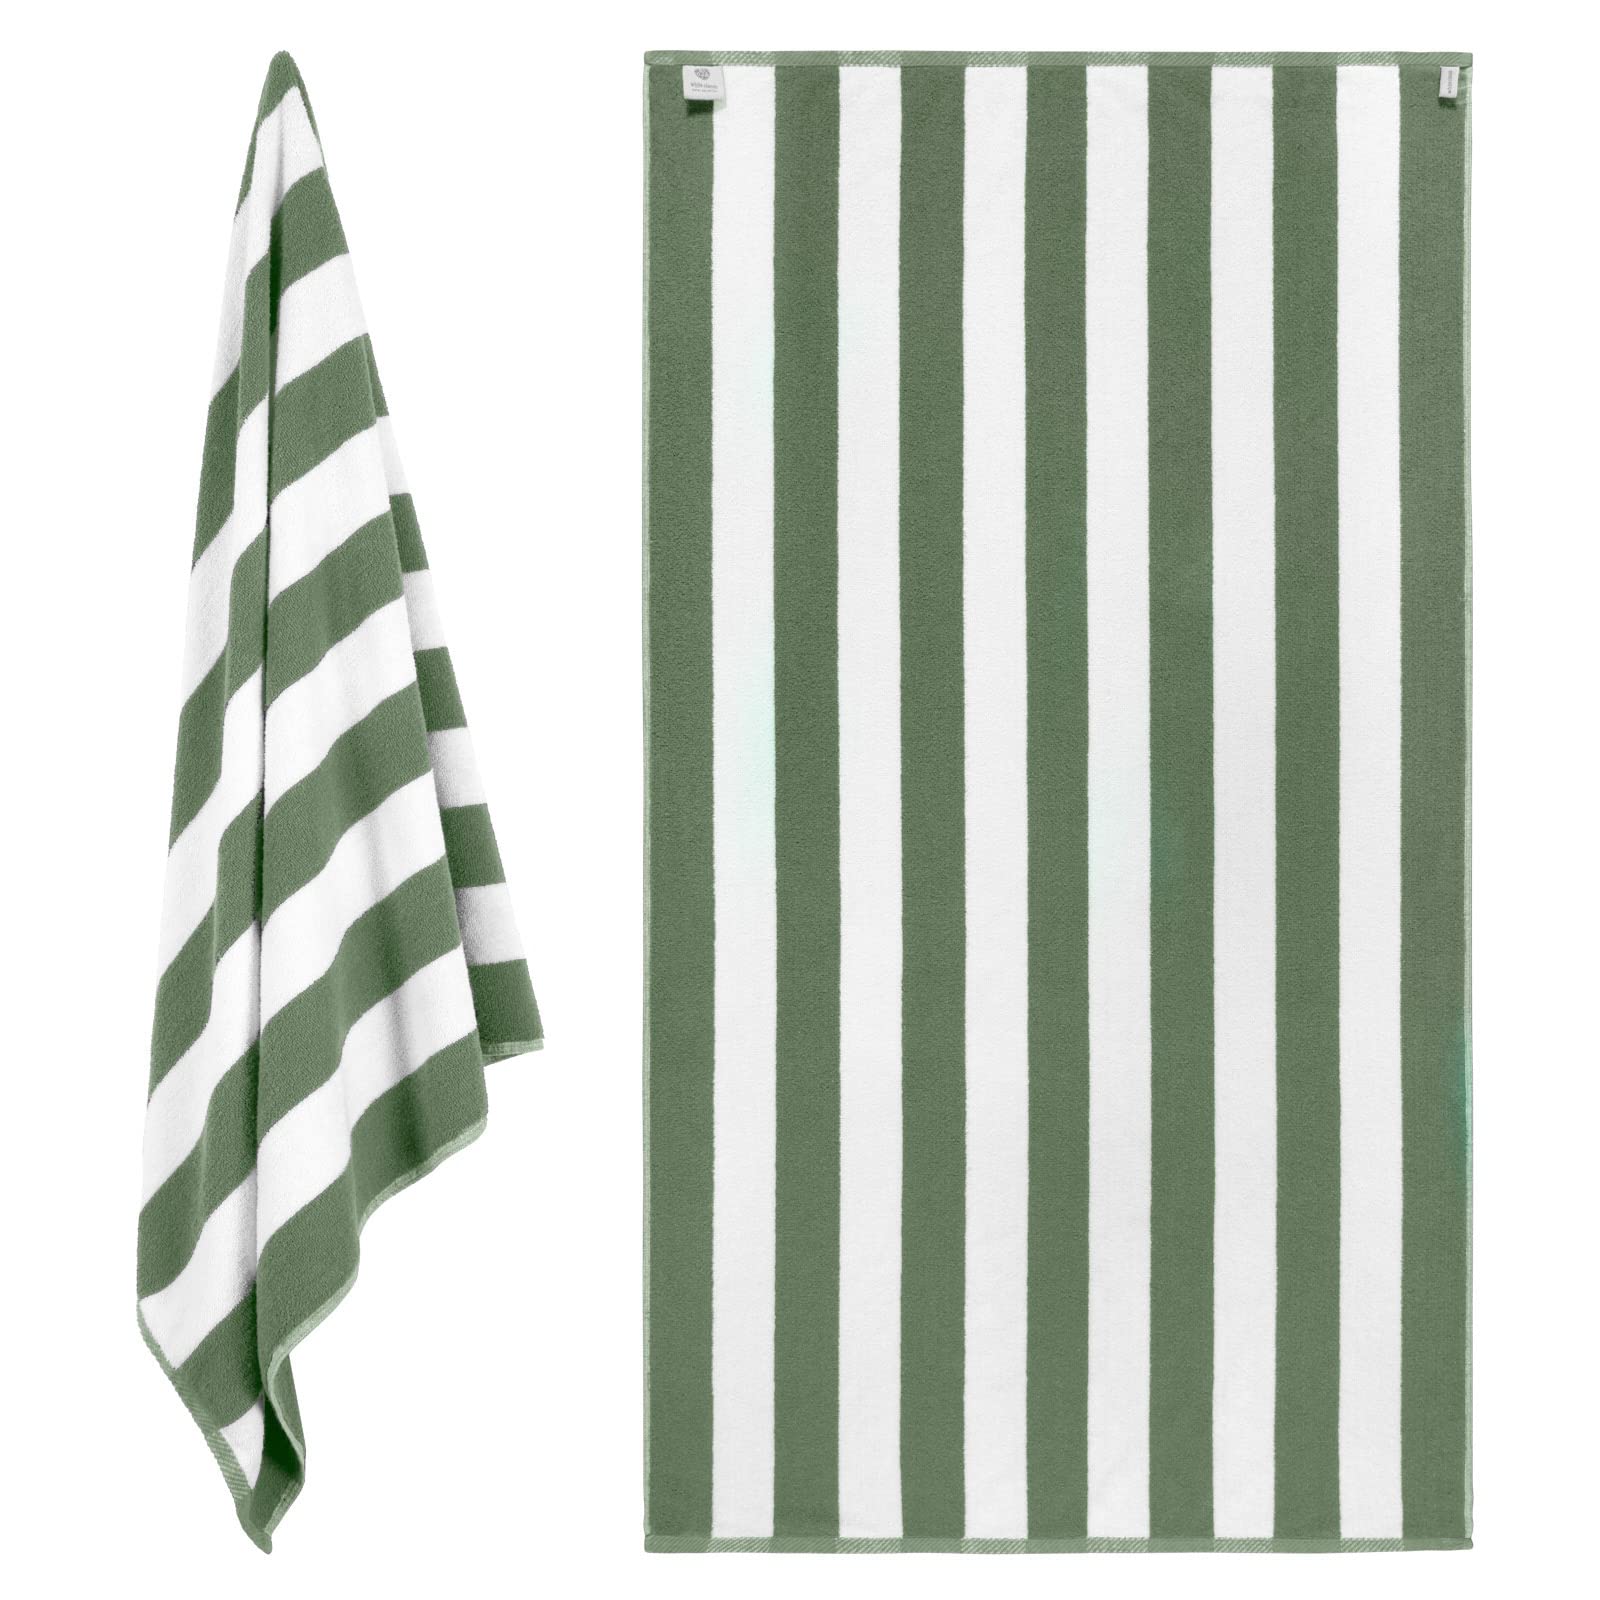 White Classic Beach Towels Oversized Cabana Stripe Cotton Bath Towel Large - Luxury Plush Thick Hotel Swim Pool Towels for Adults Super Absorbent Quick Dry - 35x70 Khaki Green [2 Pack]  - Like New